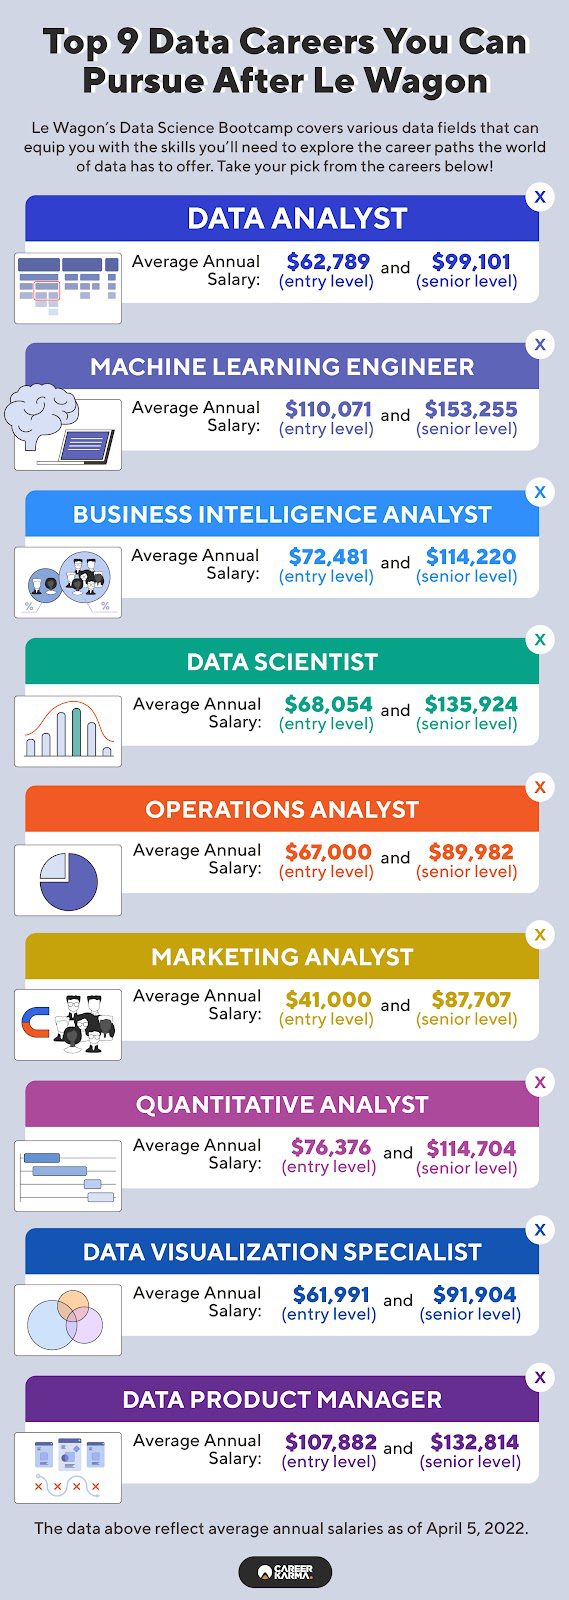 An infographic of data careers you can explore after completing Le Wagon’s Data Science program